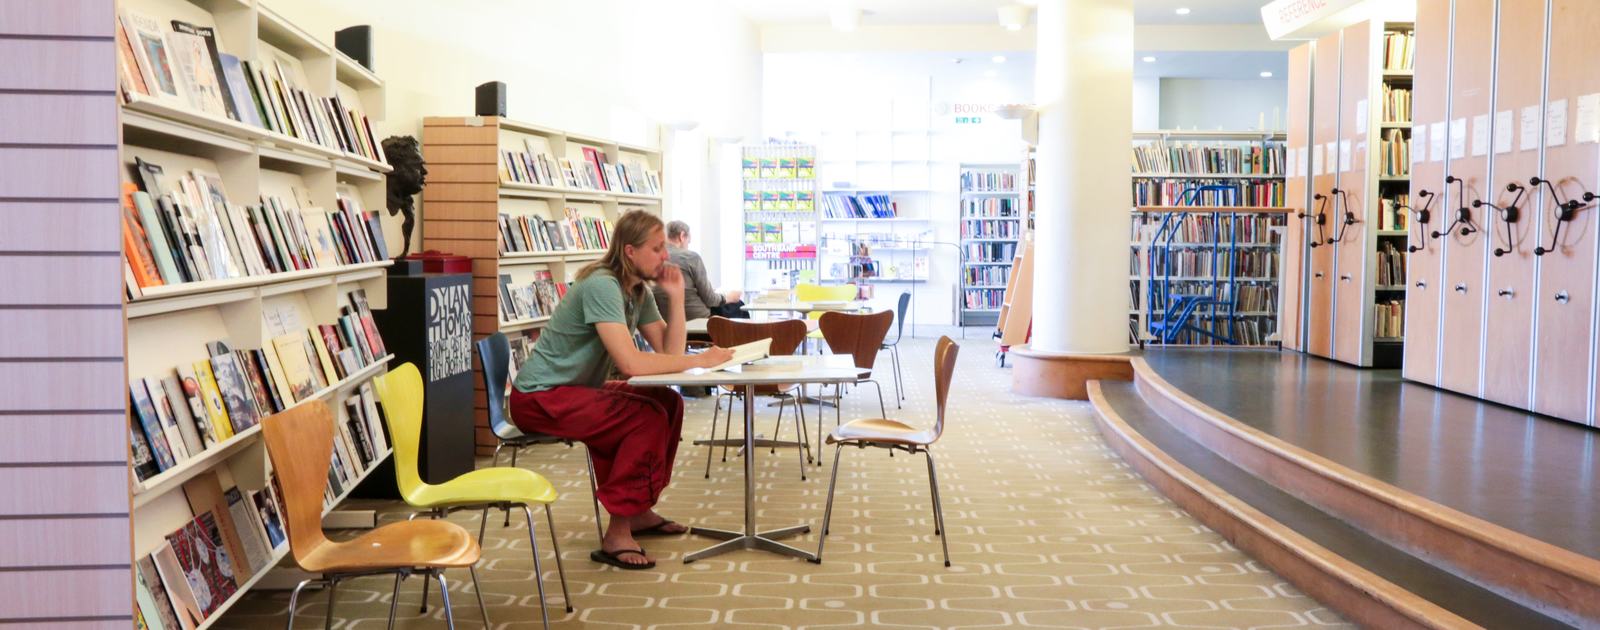 Southbank Centre Poetry Library.Royal Festival Hall.Library, rare books, visitors